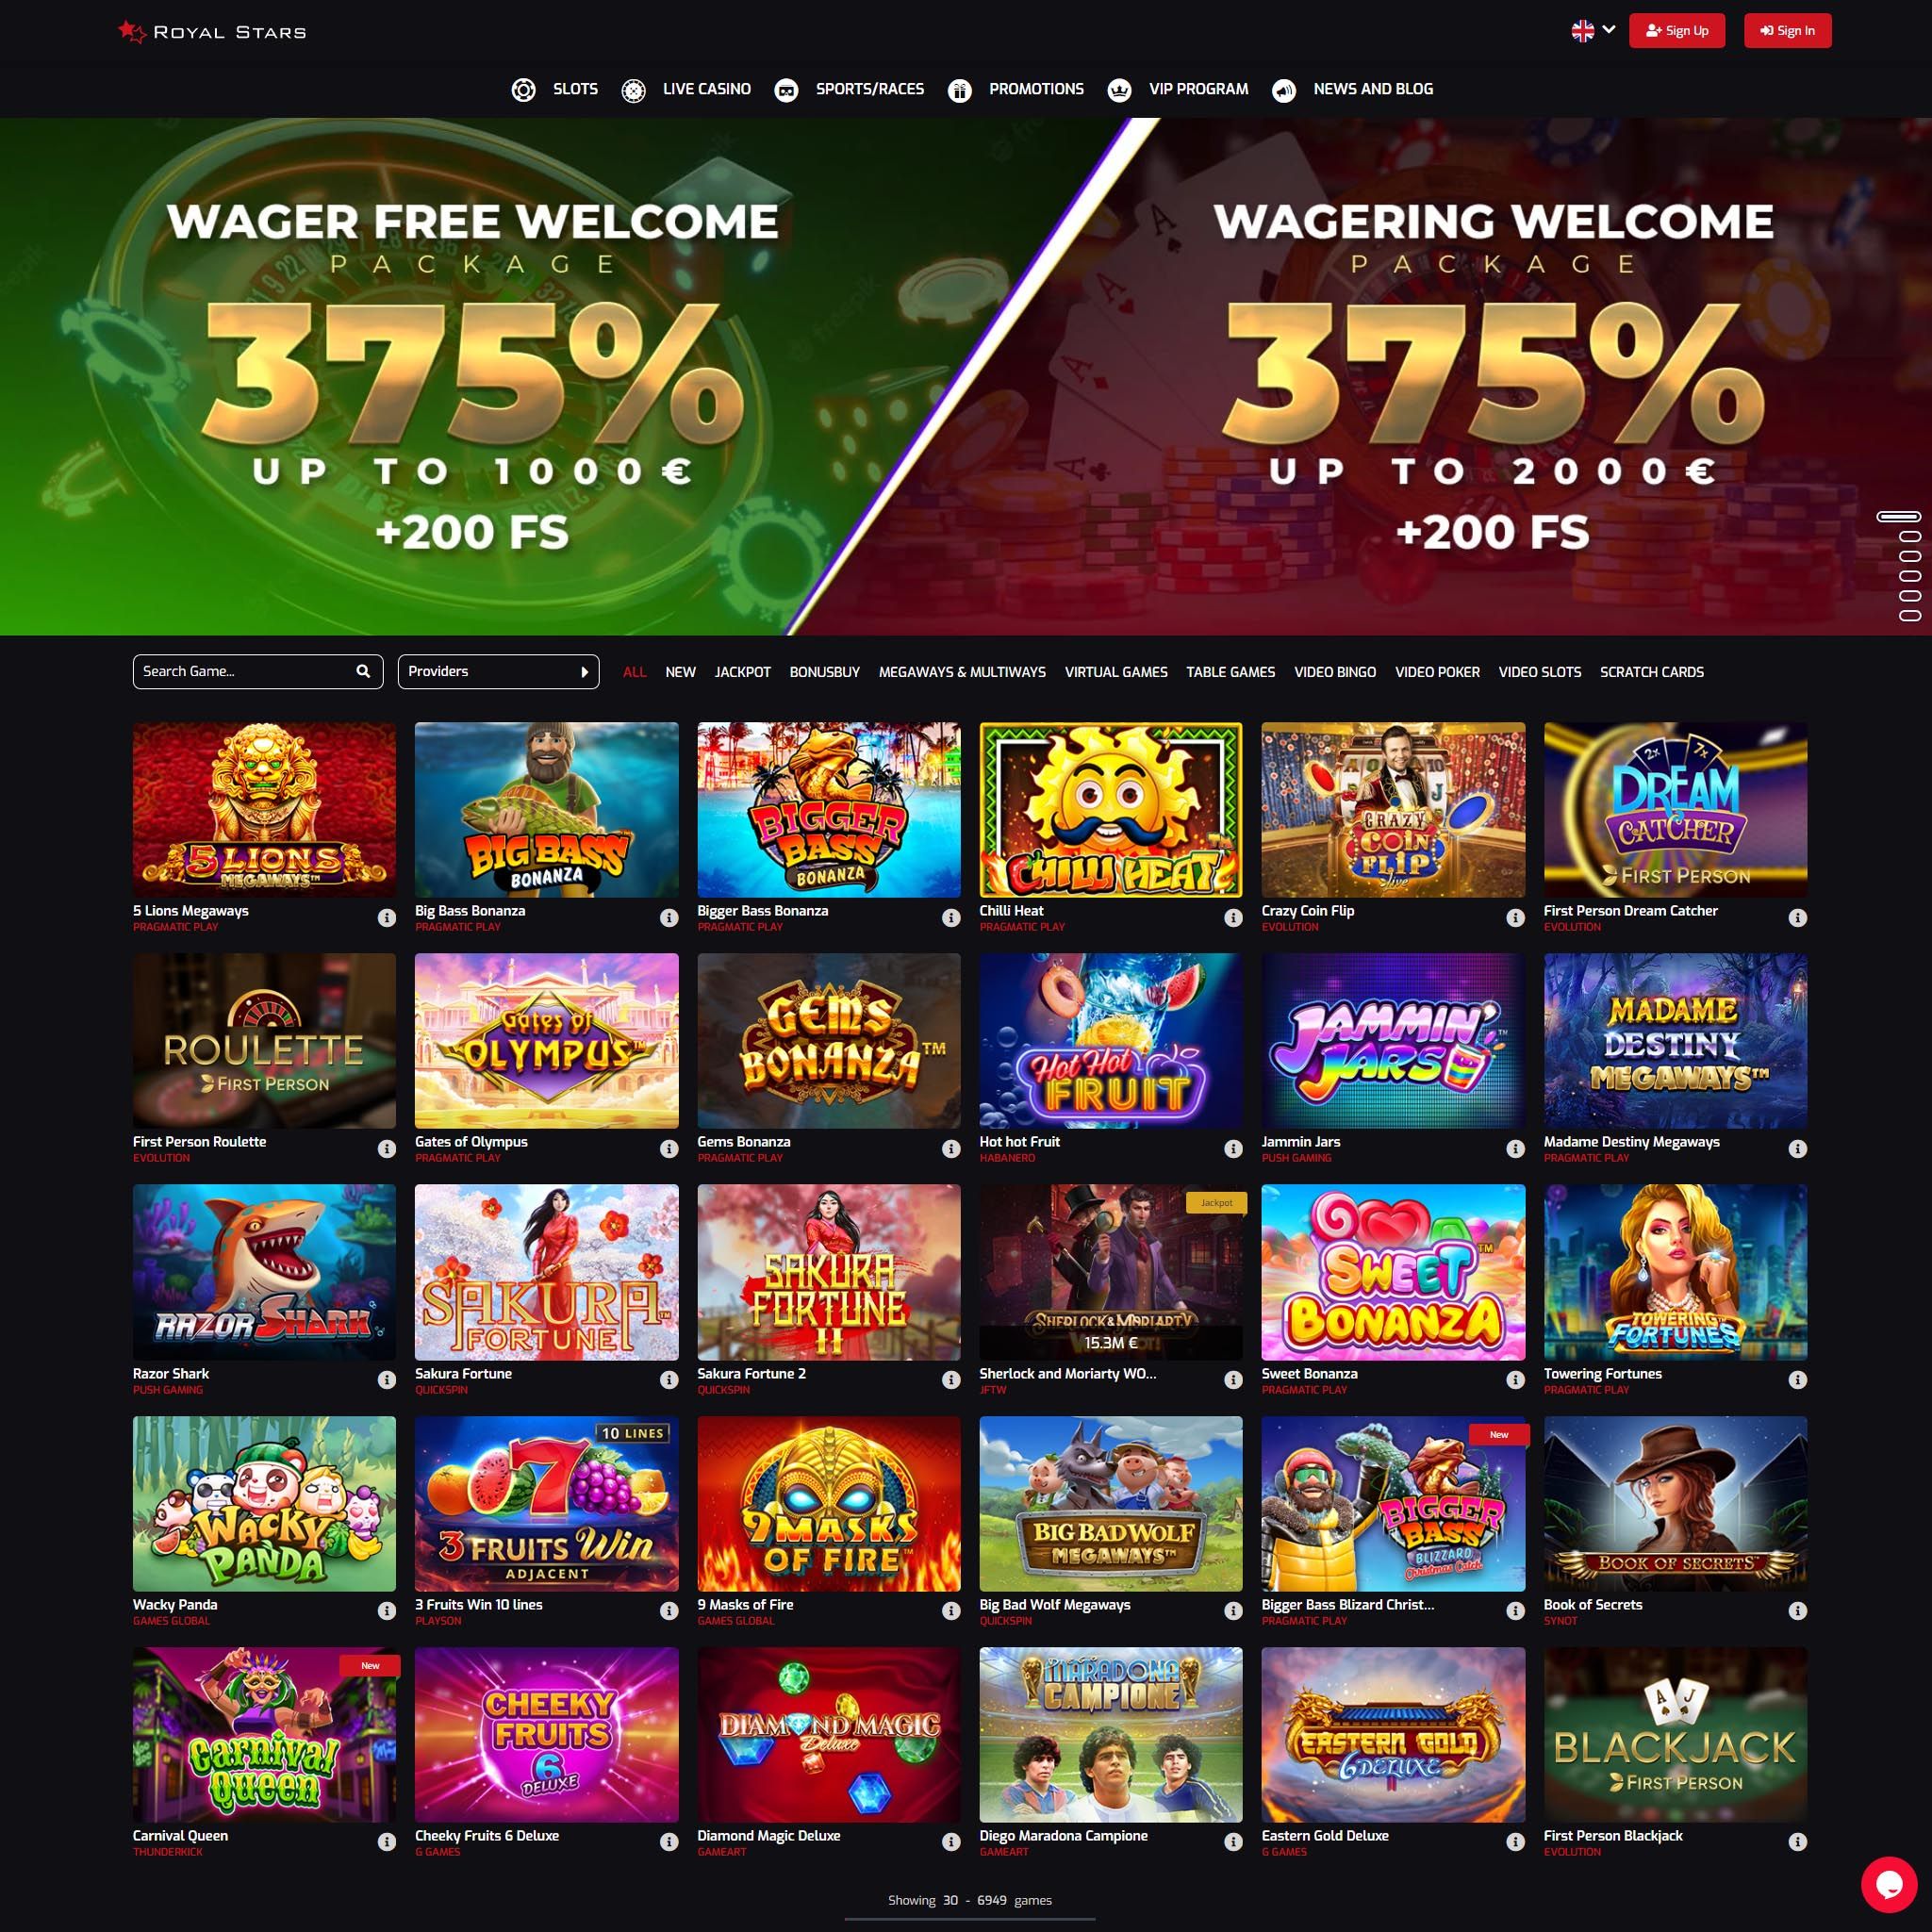 Royal Stars Casino review by Mr. Gamble